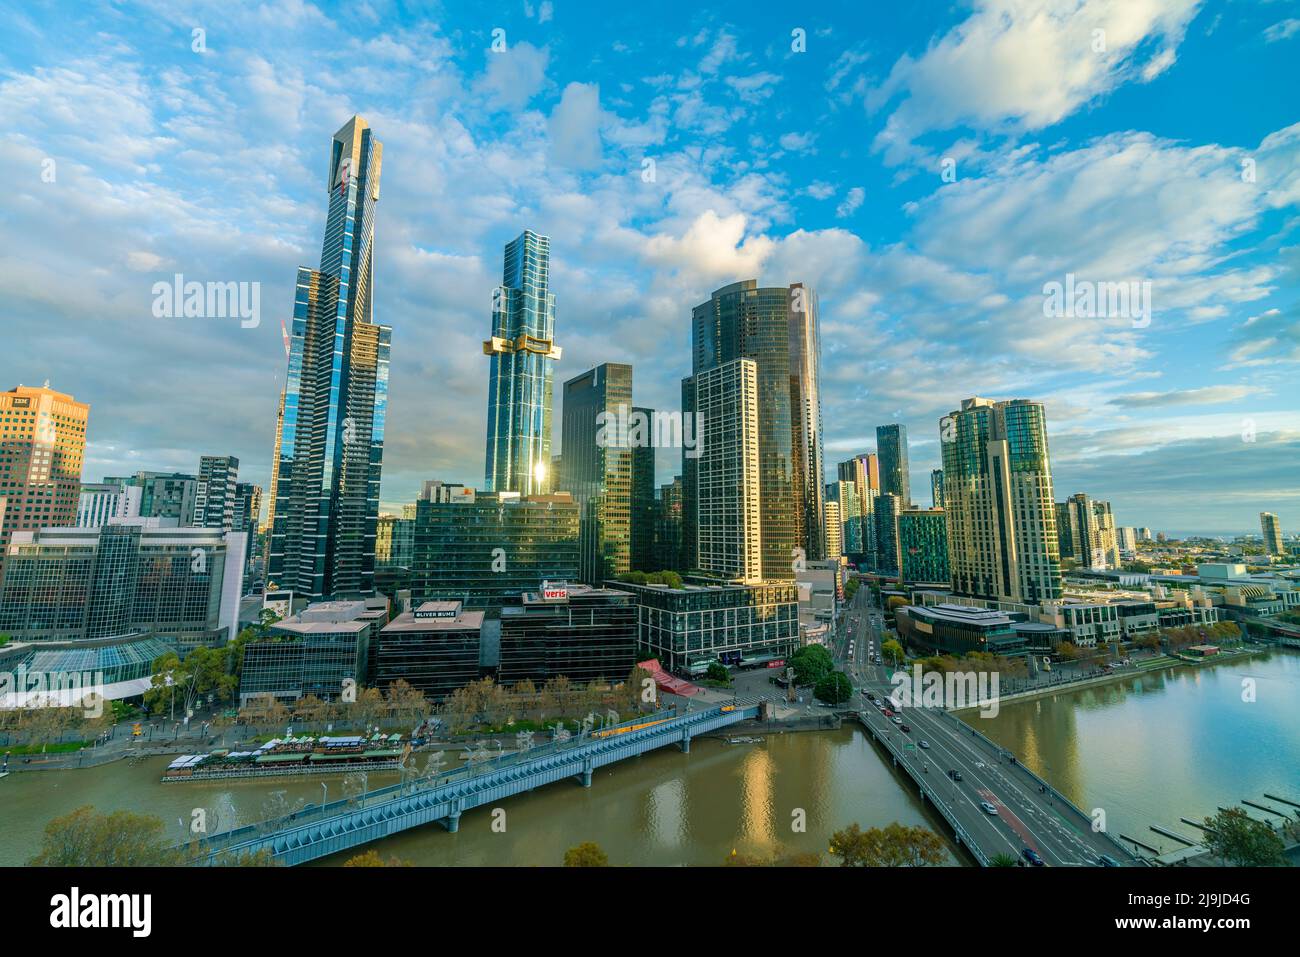 Melbourne, Australia - May 2, 2022: View of Melbourne CBD at sunset Stock Photo